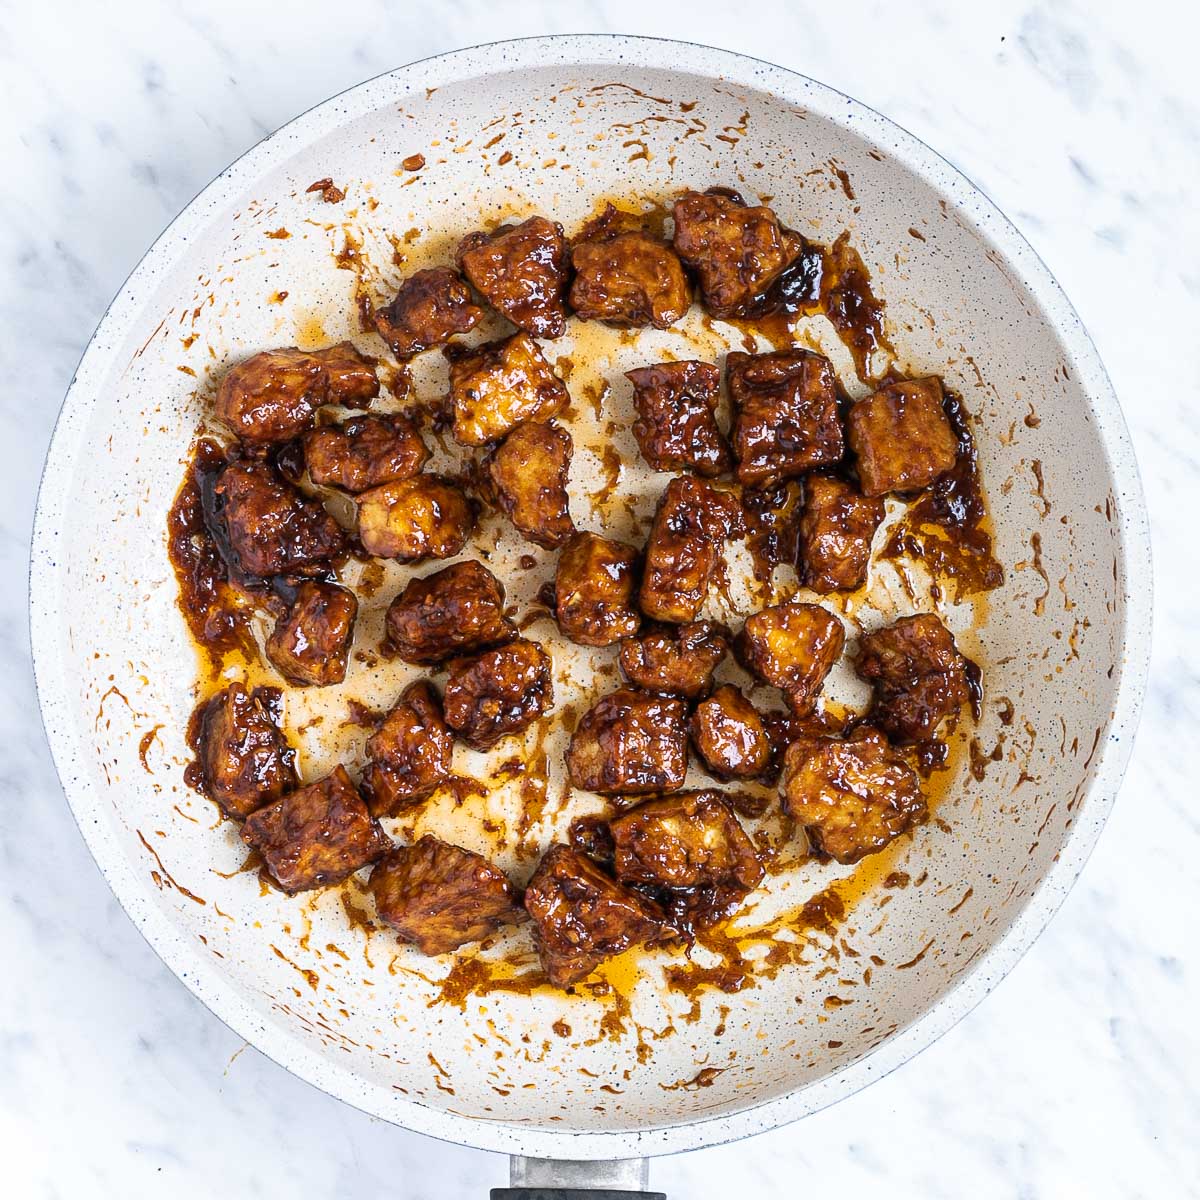 Brown sticky tofu pieces in a white frying pan.